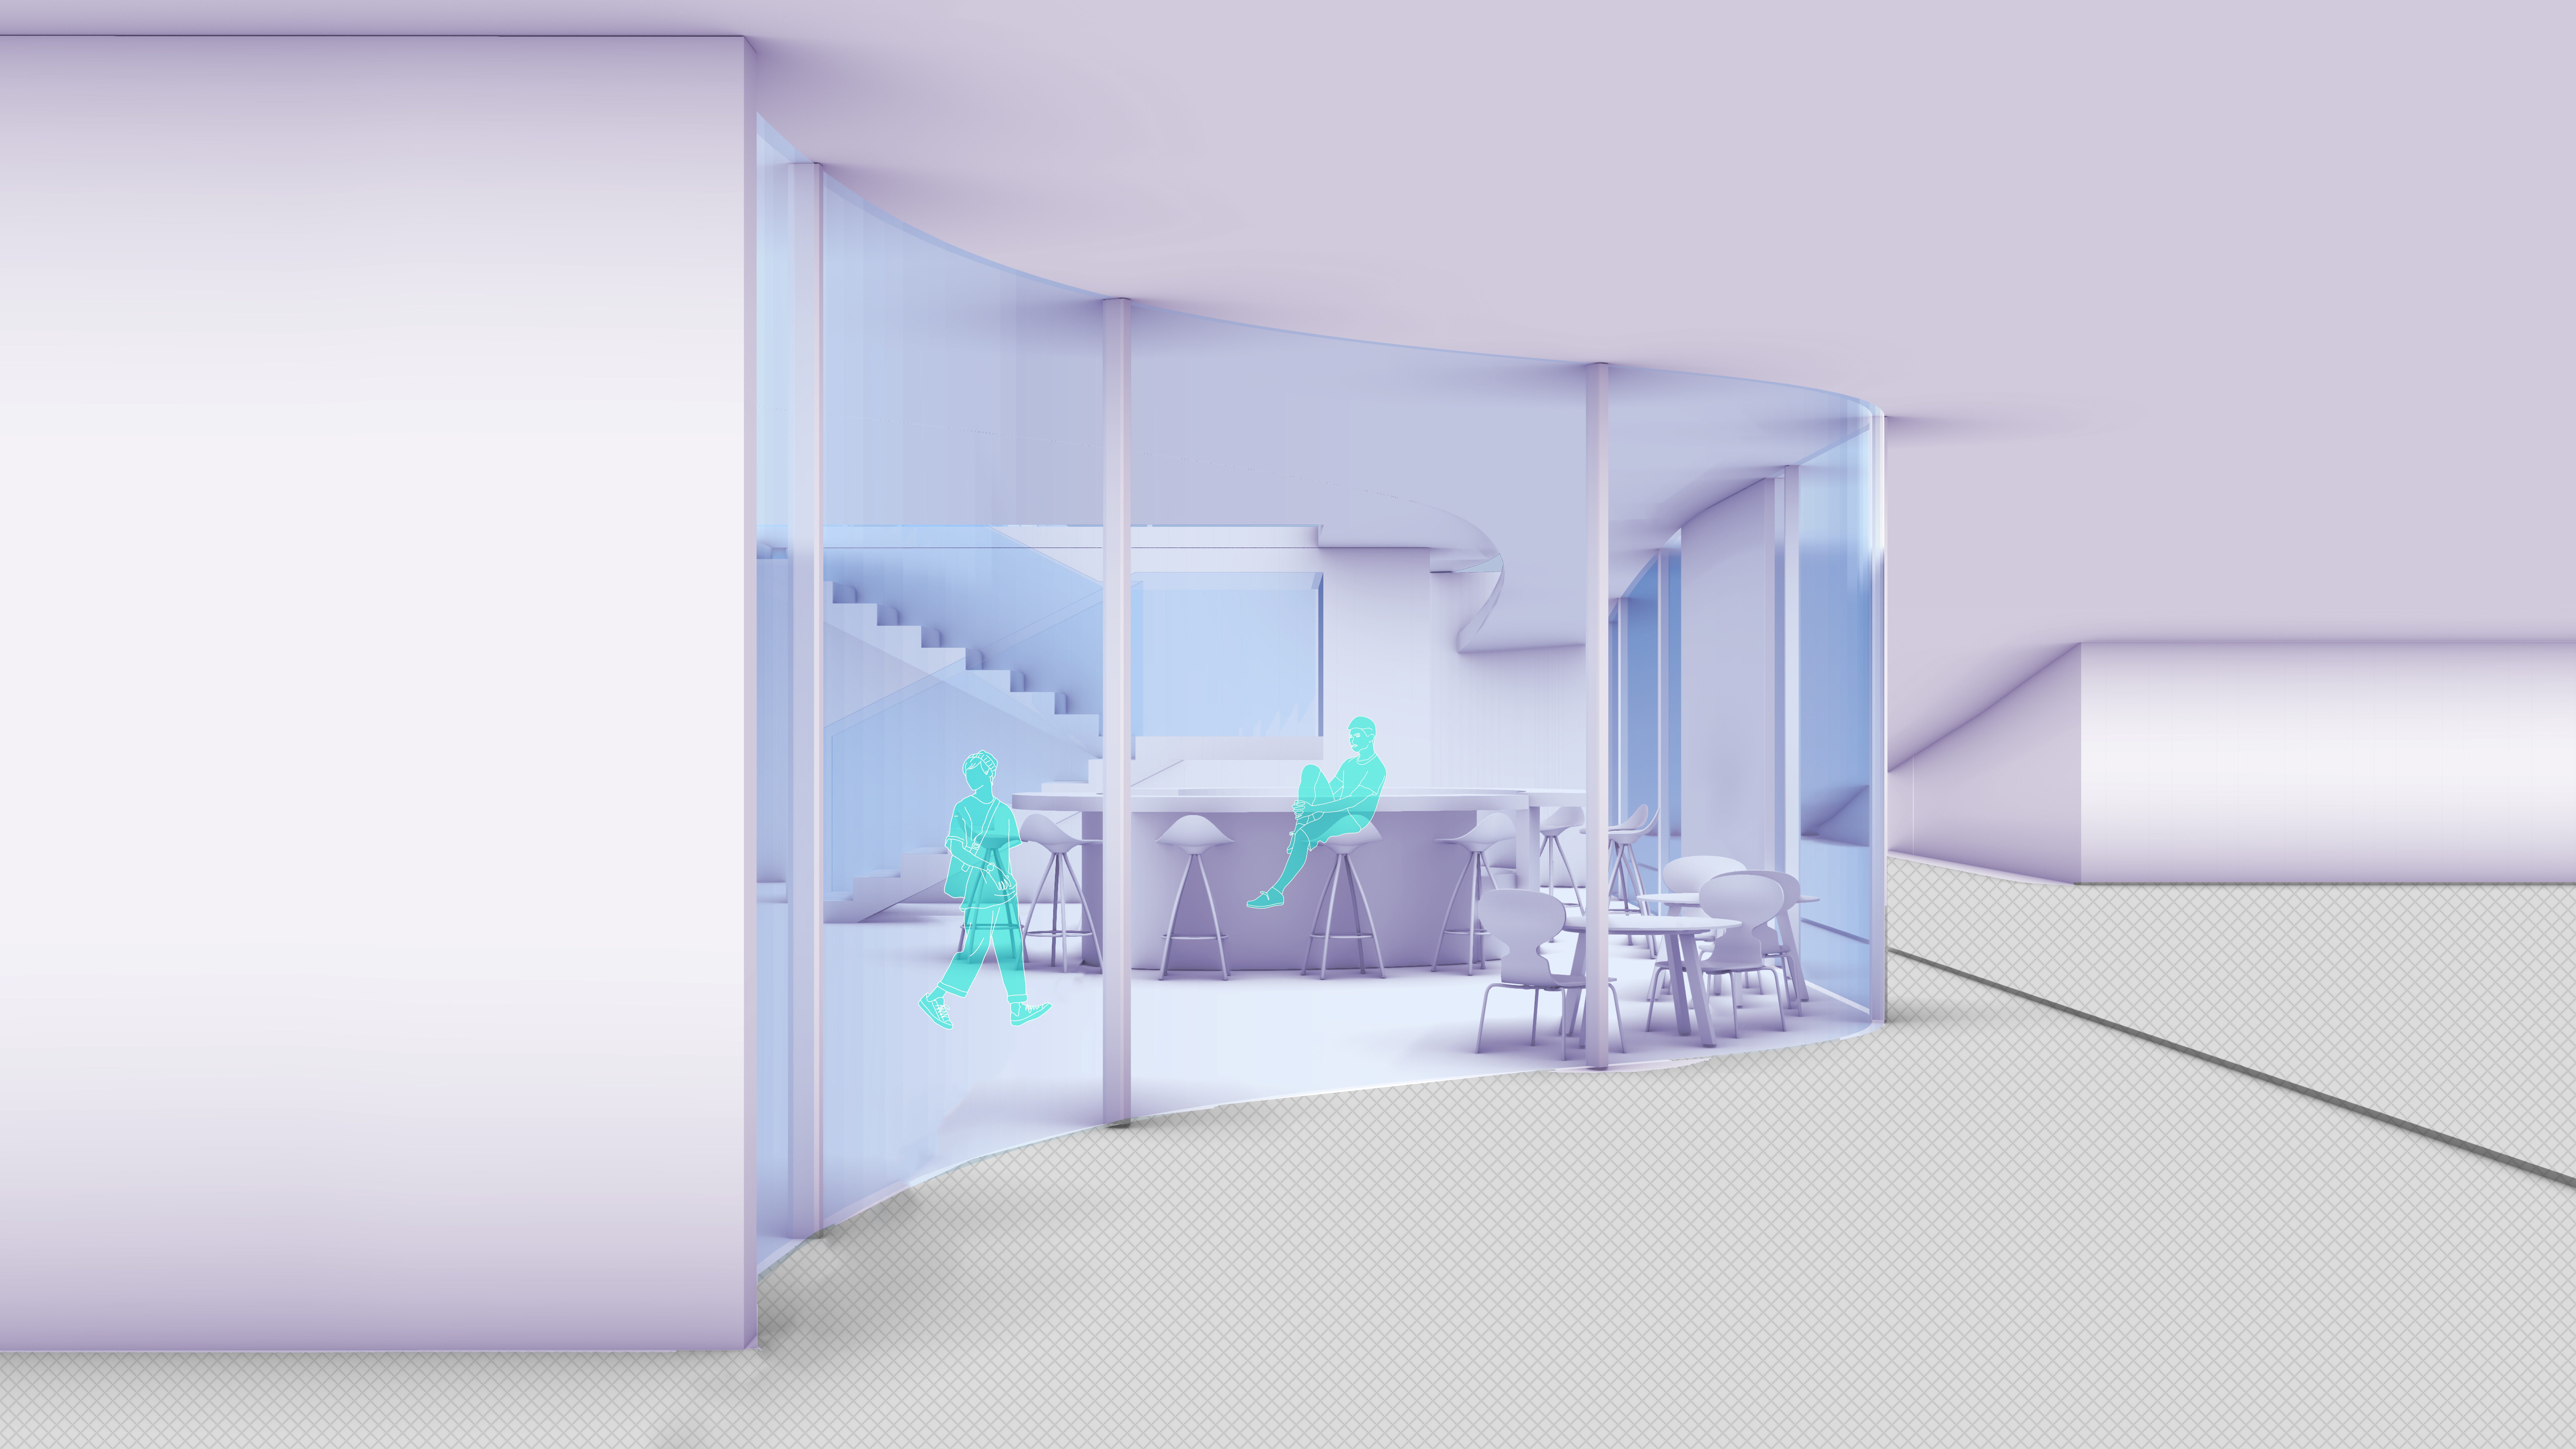 rendered interior view of room in architecture building